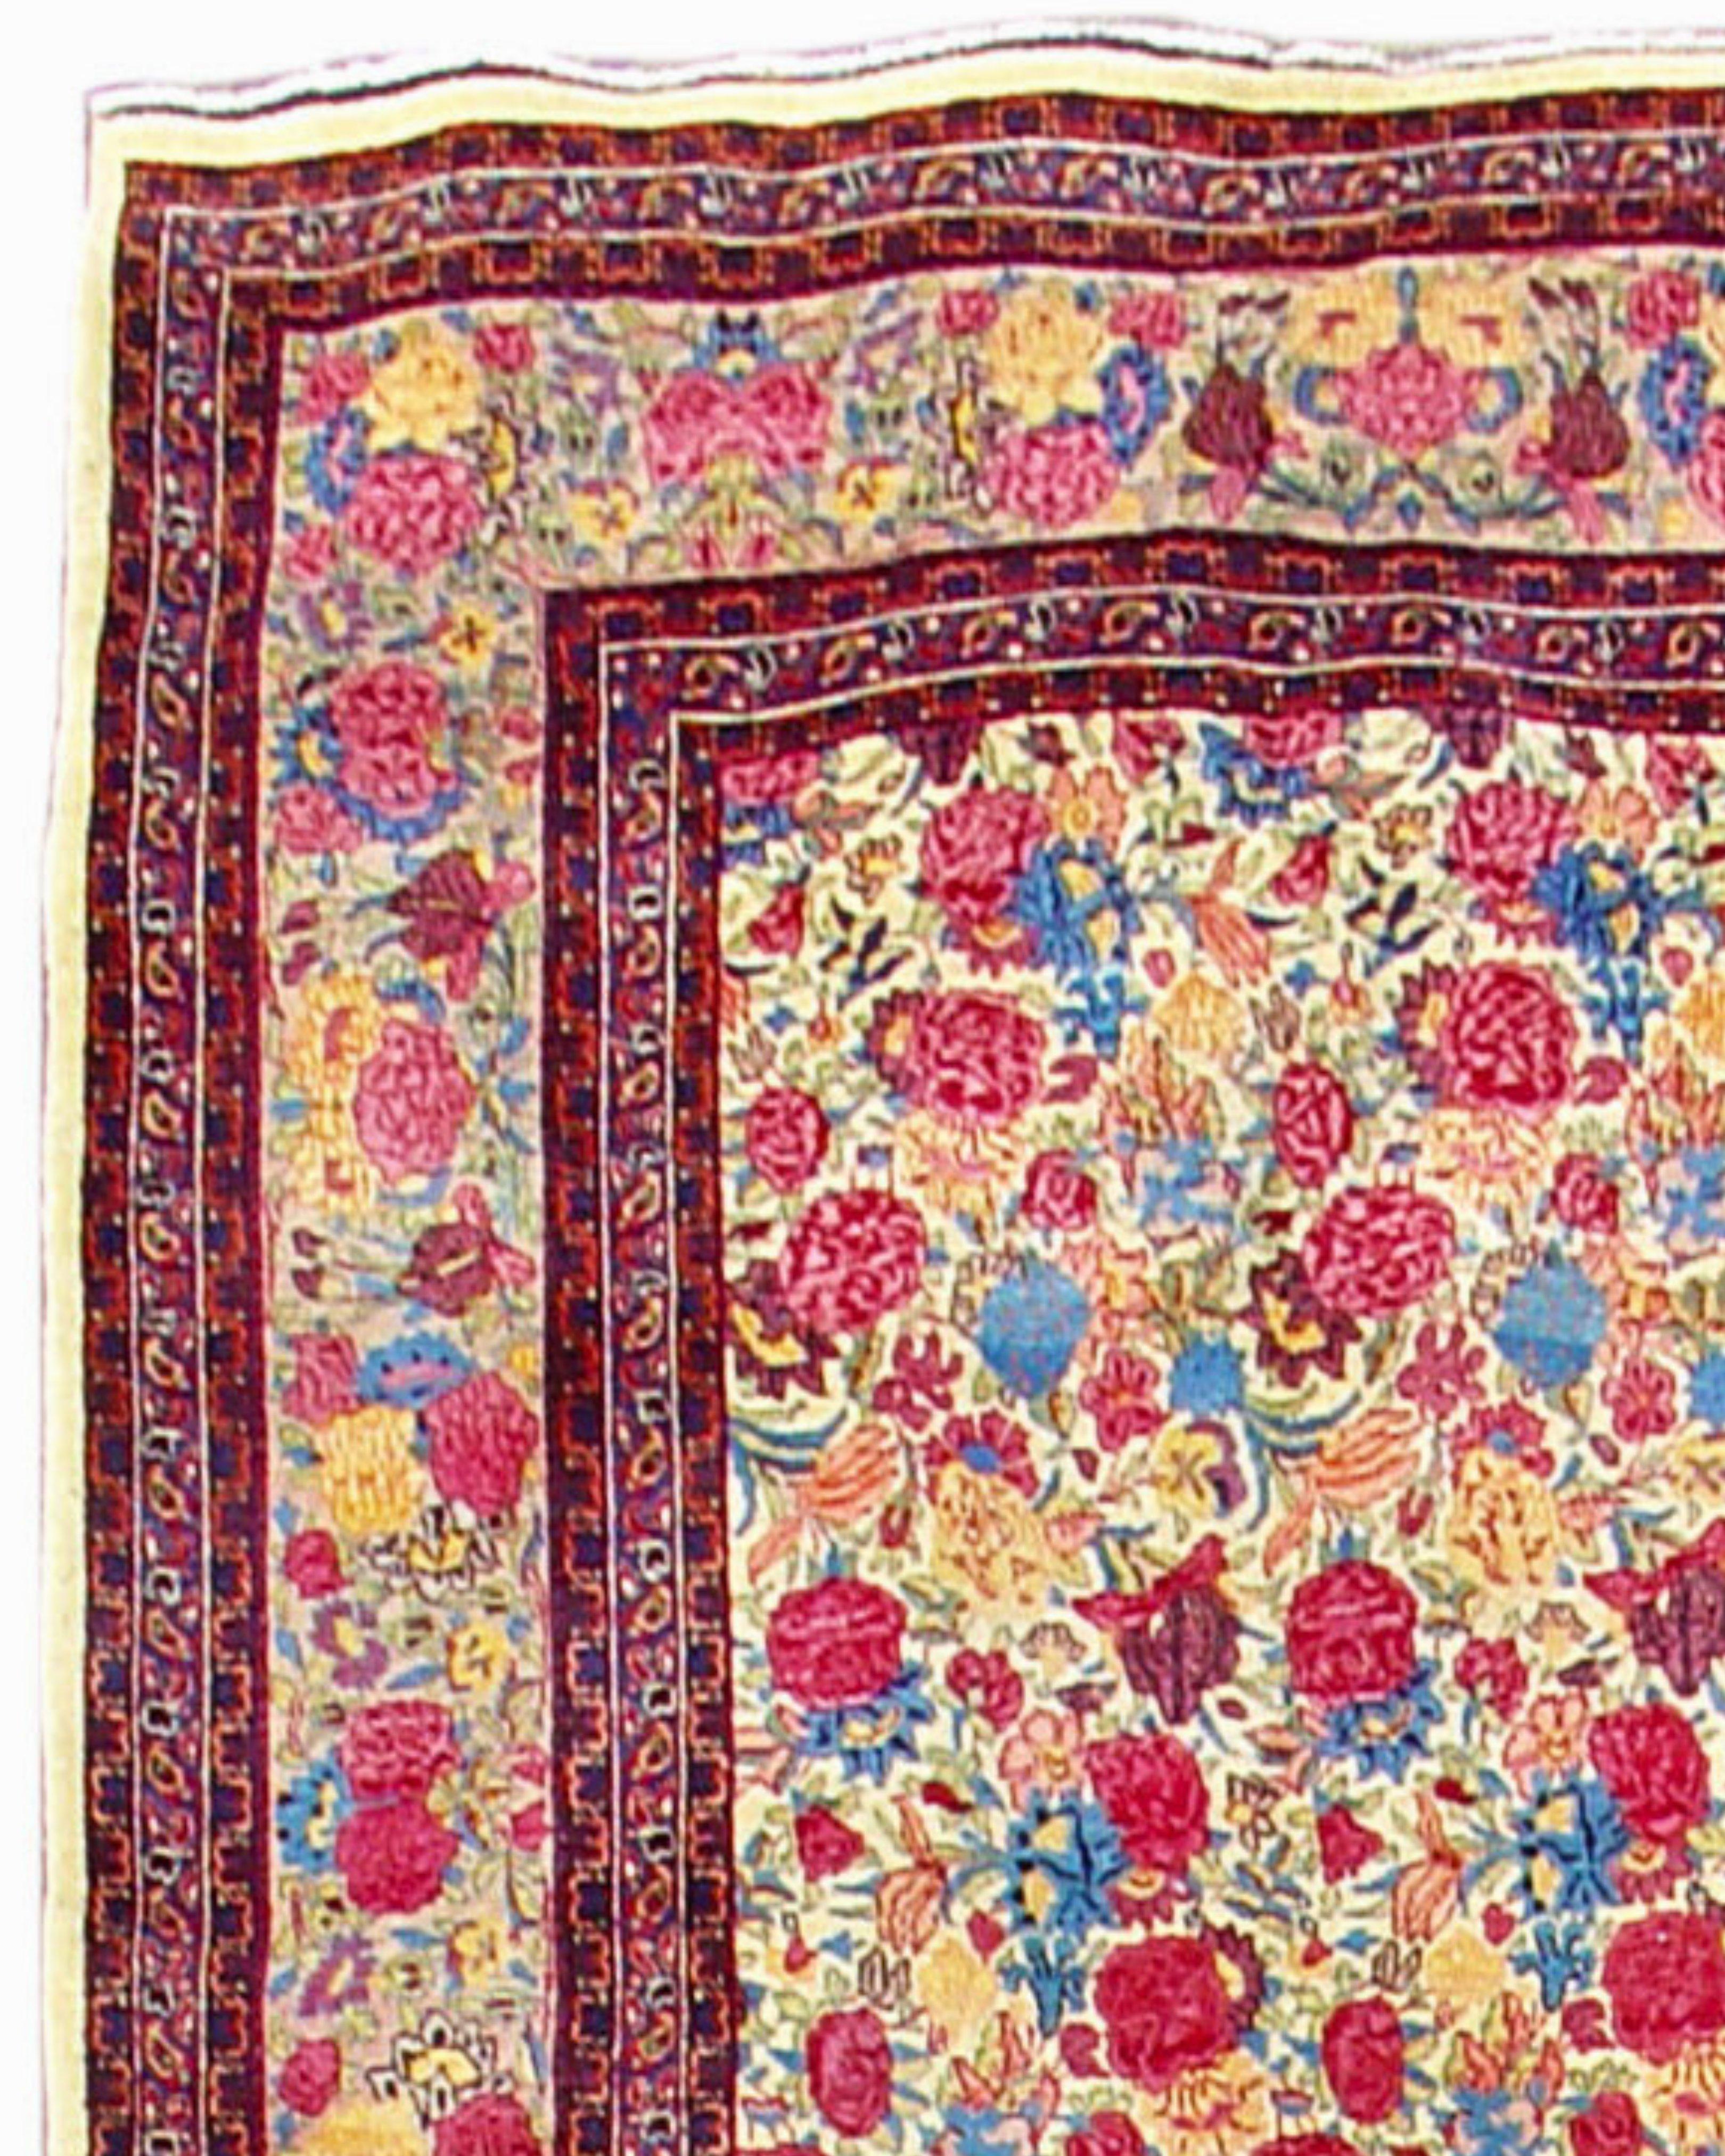 Hand-Knotted Antique Persian Mashad Carpet, 19th Century For Sale